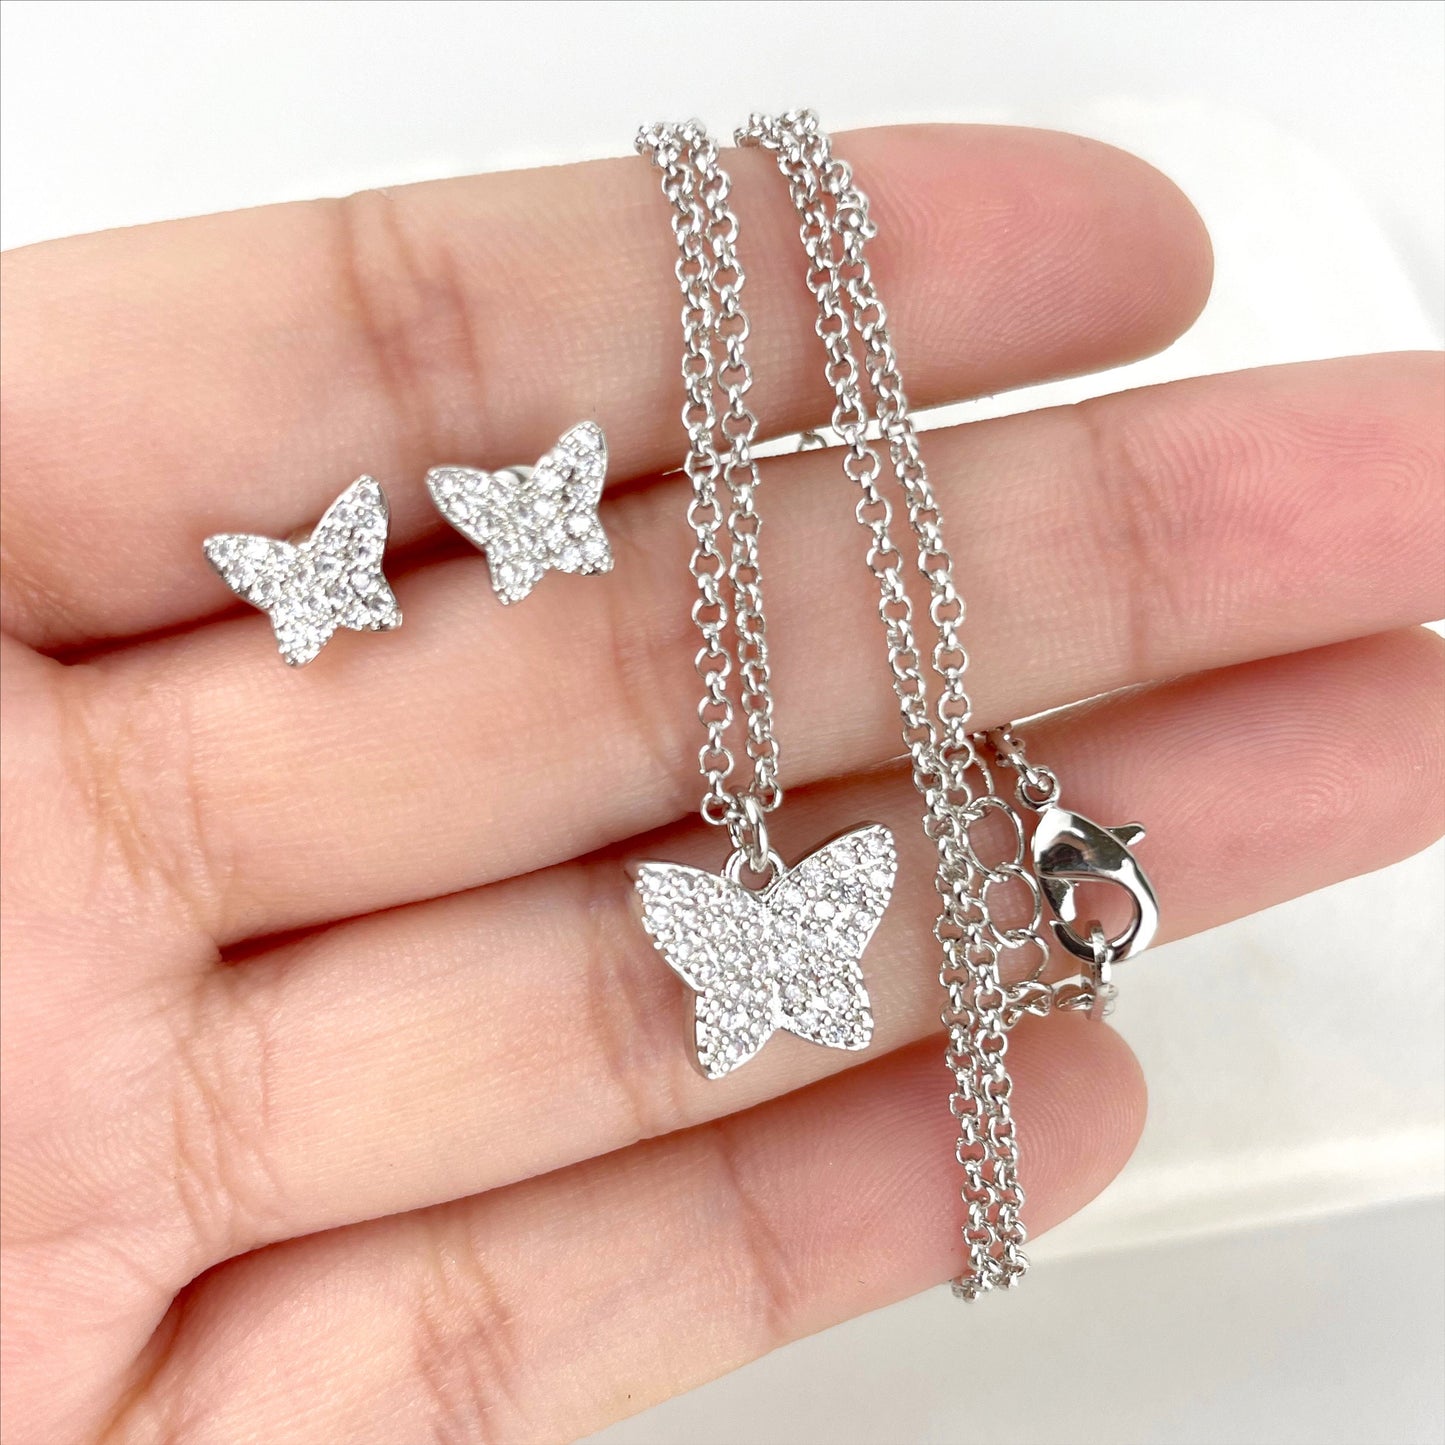 Silver Filled 1.6mm Cable Chain Necklace with Cubic Zirconia Petite Butterfly Pendant & Stud Earrings Set Wholesale Jewelry Supplies